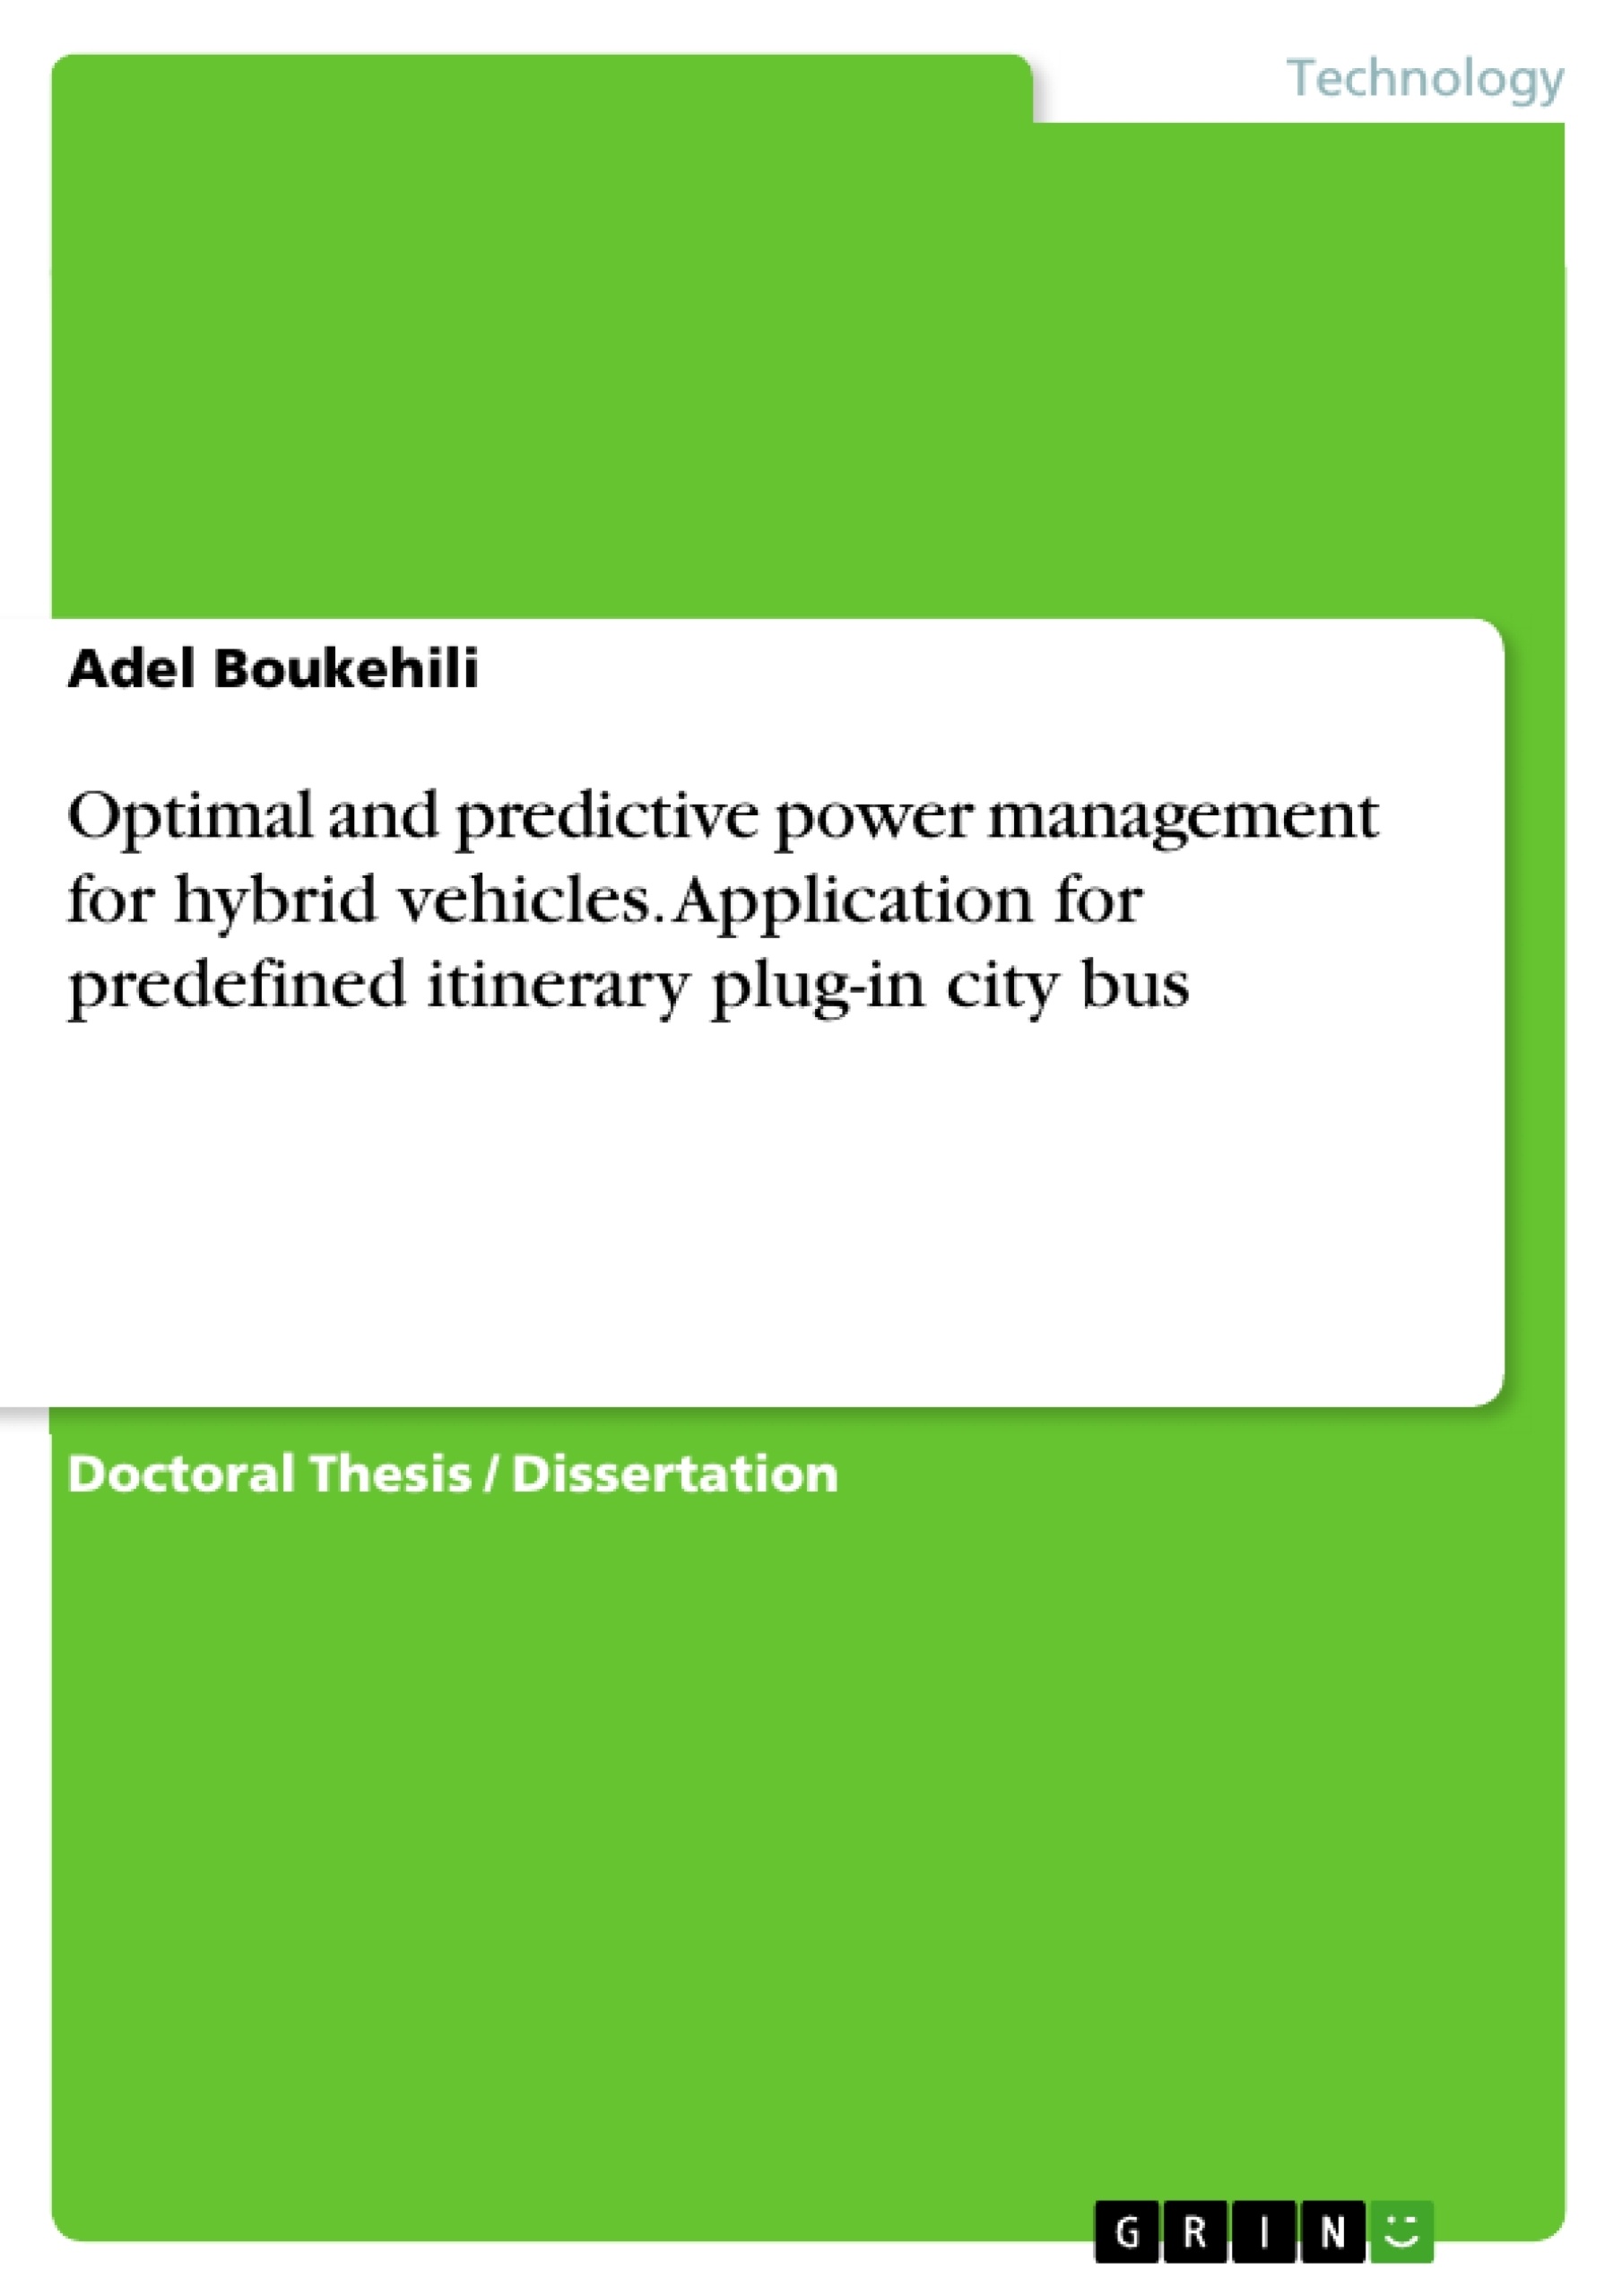 Title: Optimal and predictive power management for hybrid vehicles. Application for predefined itinerary plug-in city bus